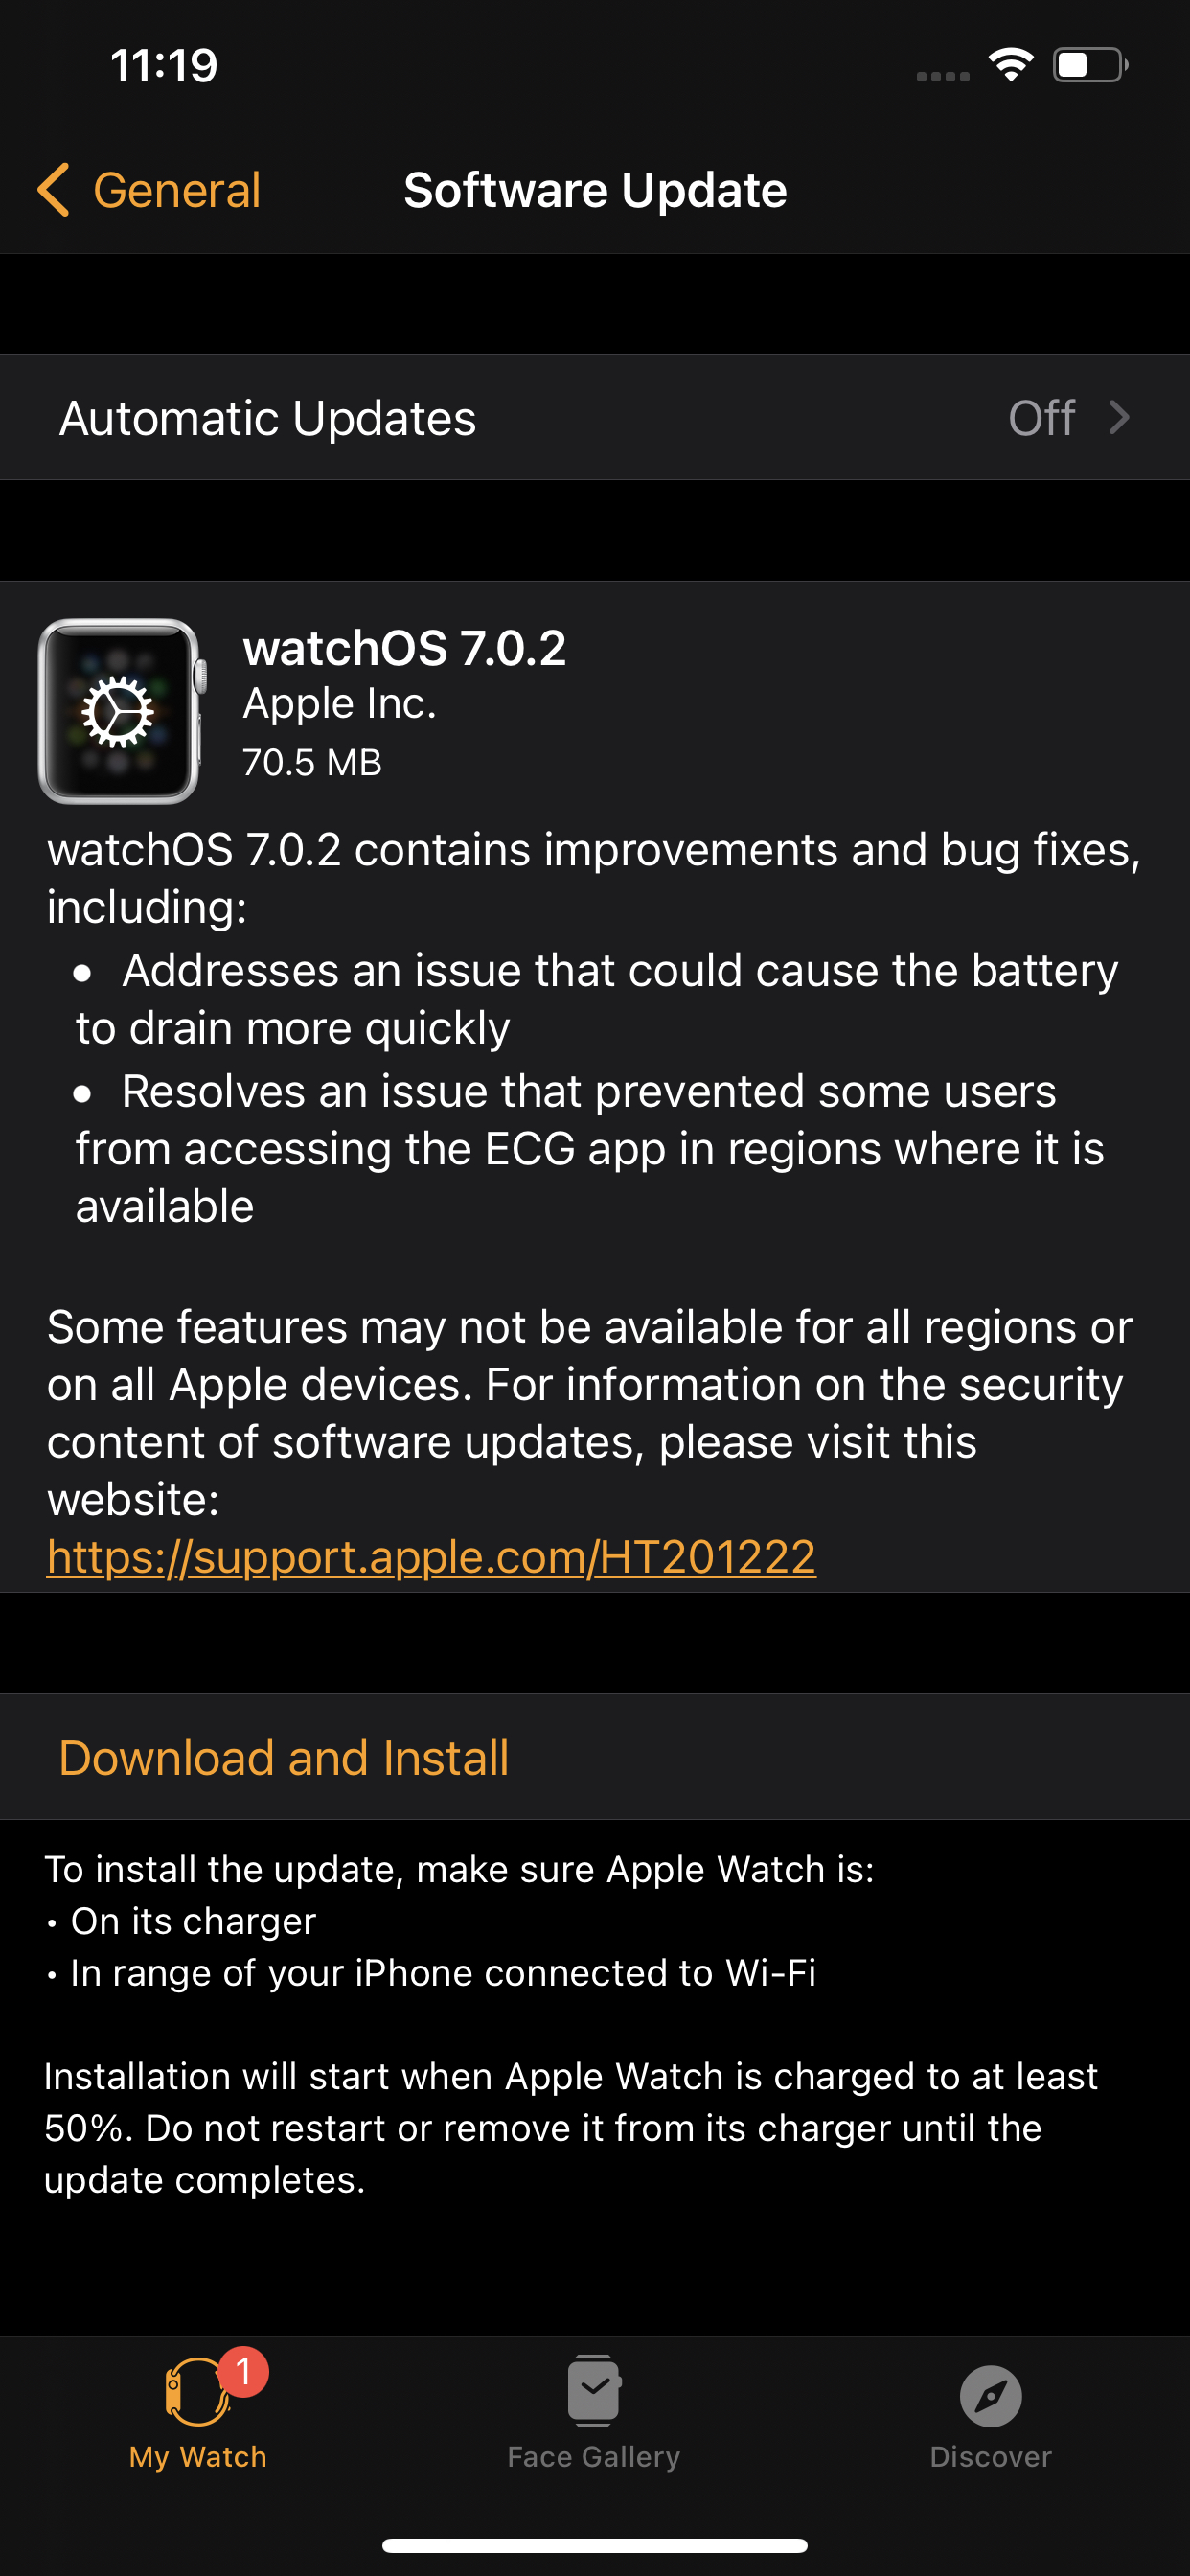 Apple Releases watchOS 7.0.2 With Fix for Battery Drain Issue